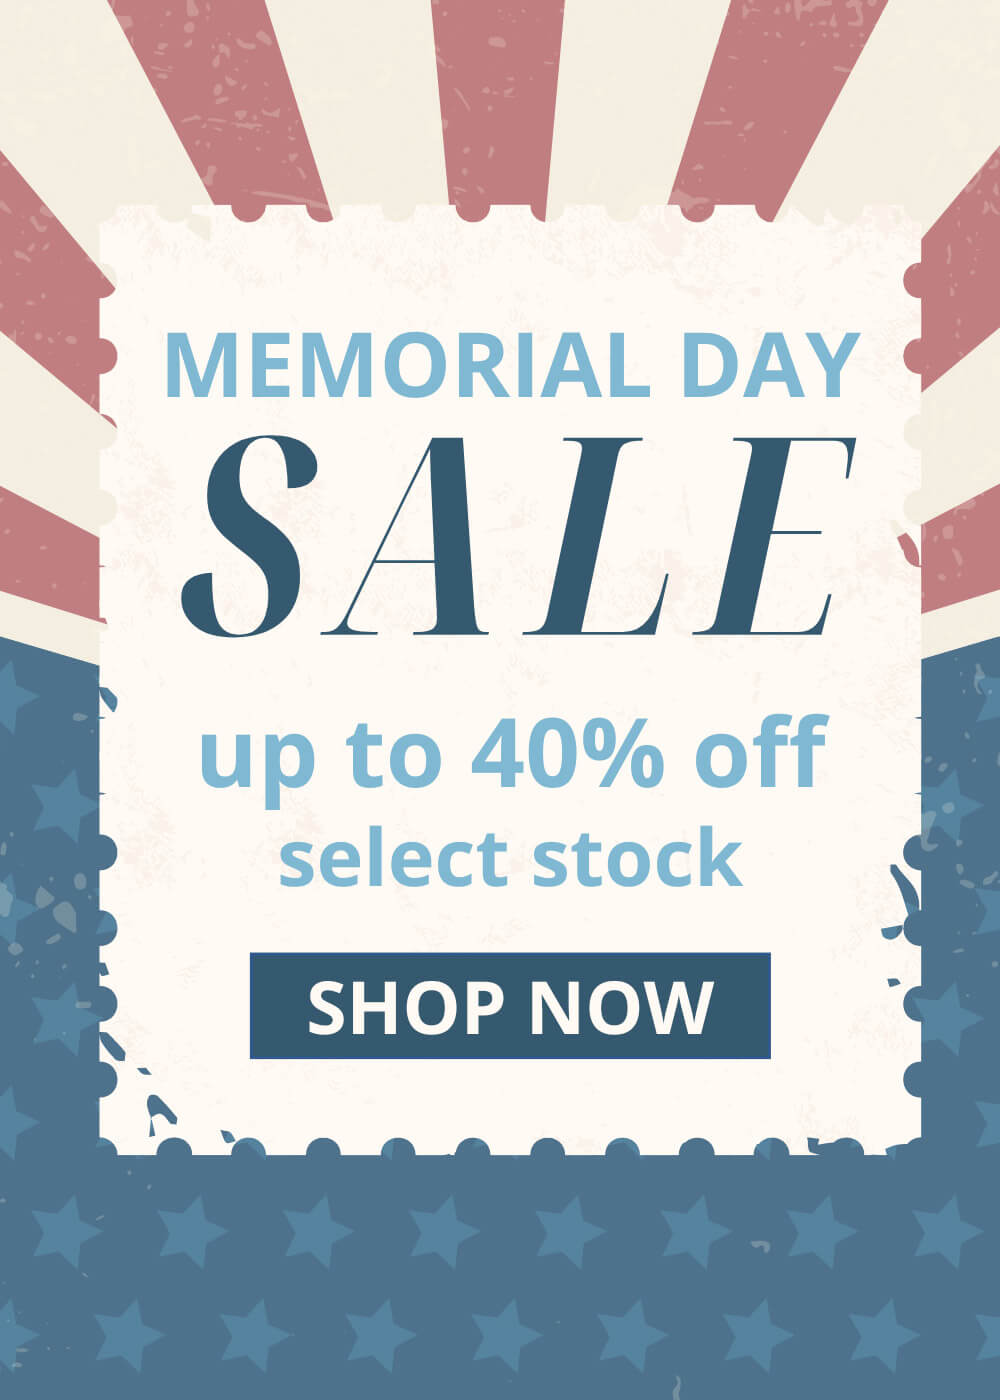 Memorial Day Sale up to 40% Off select stock